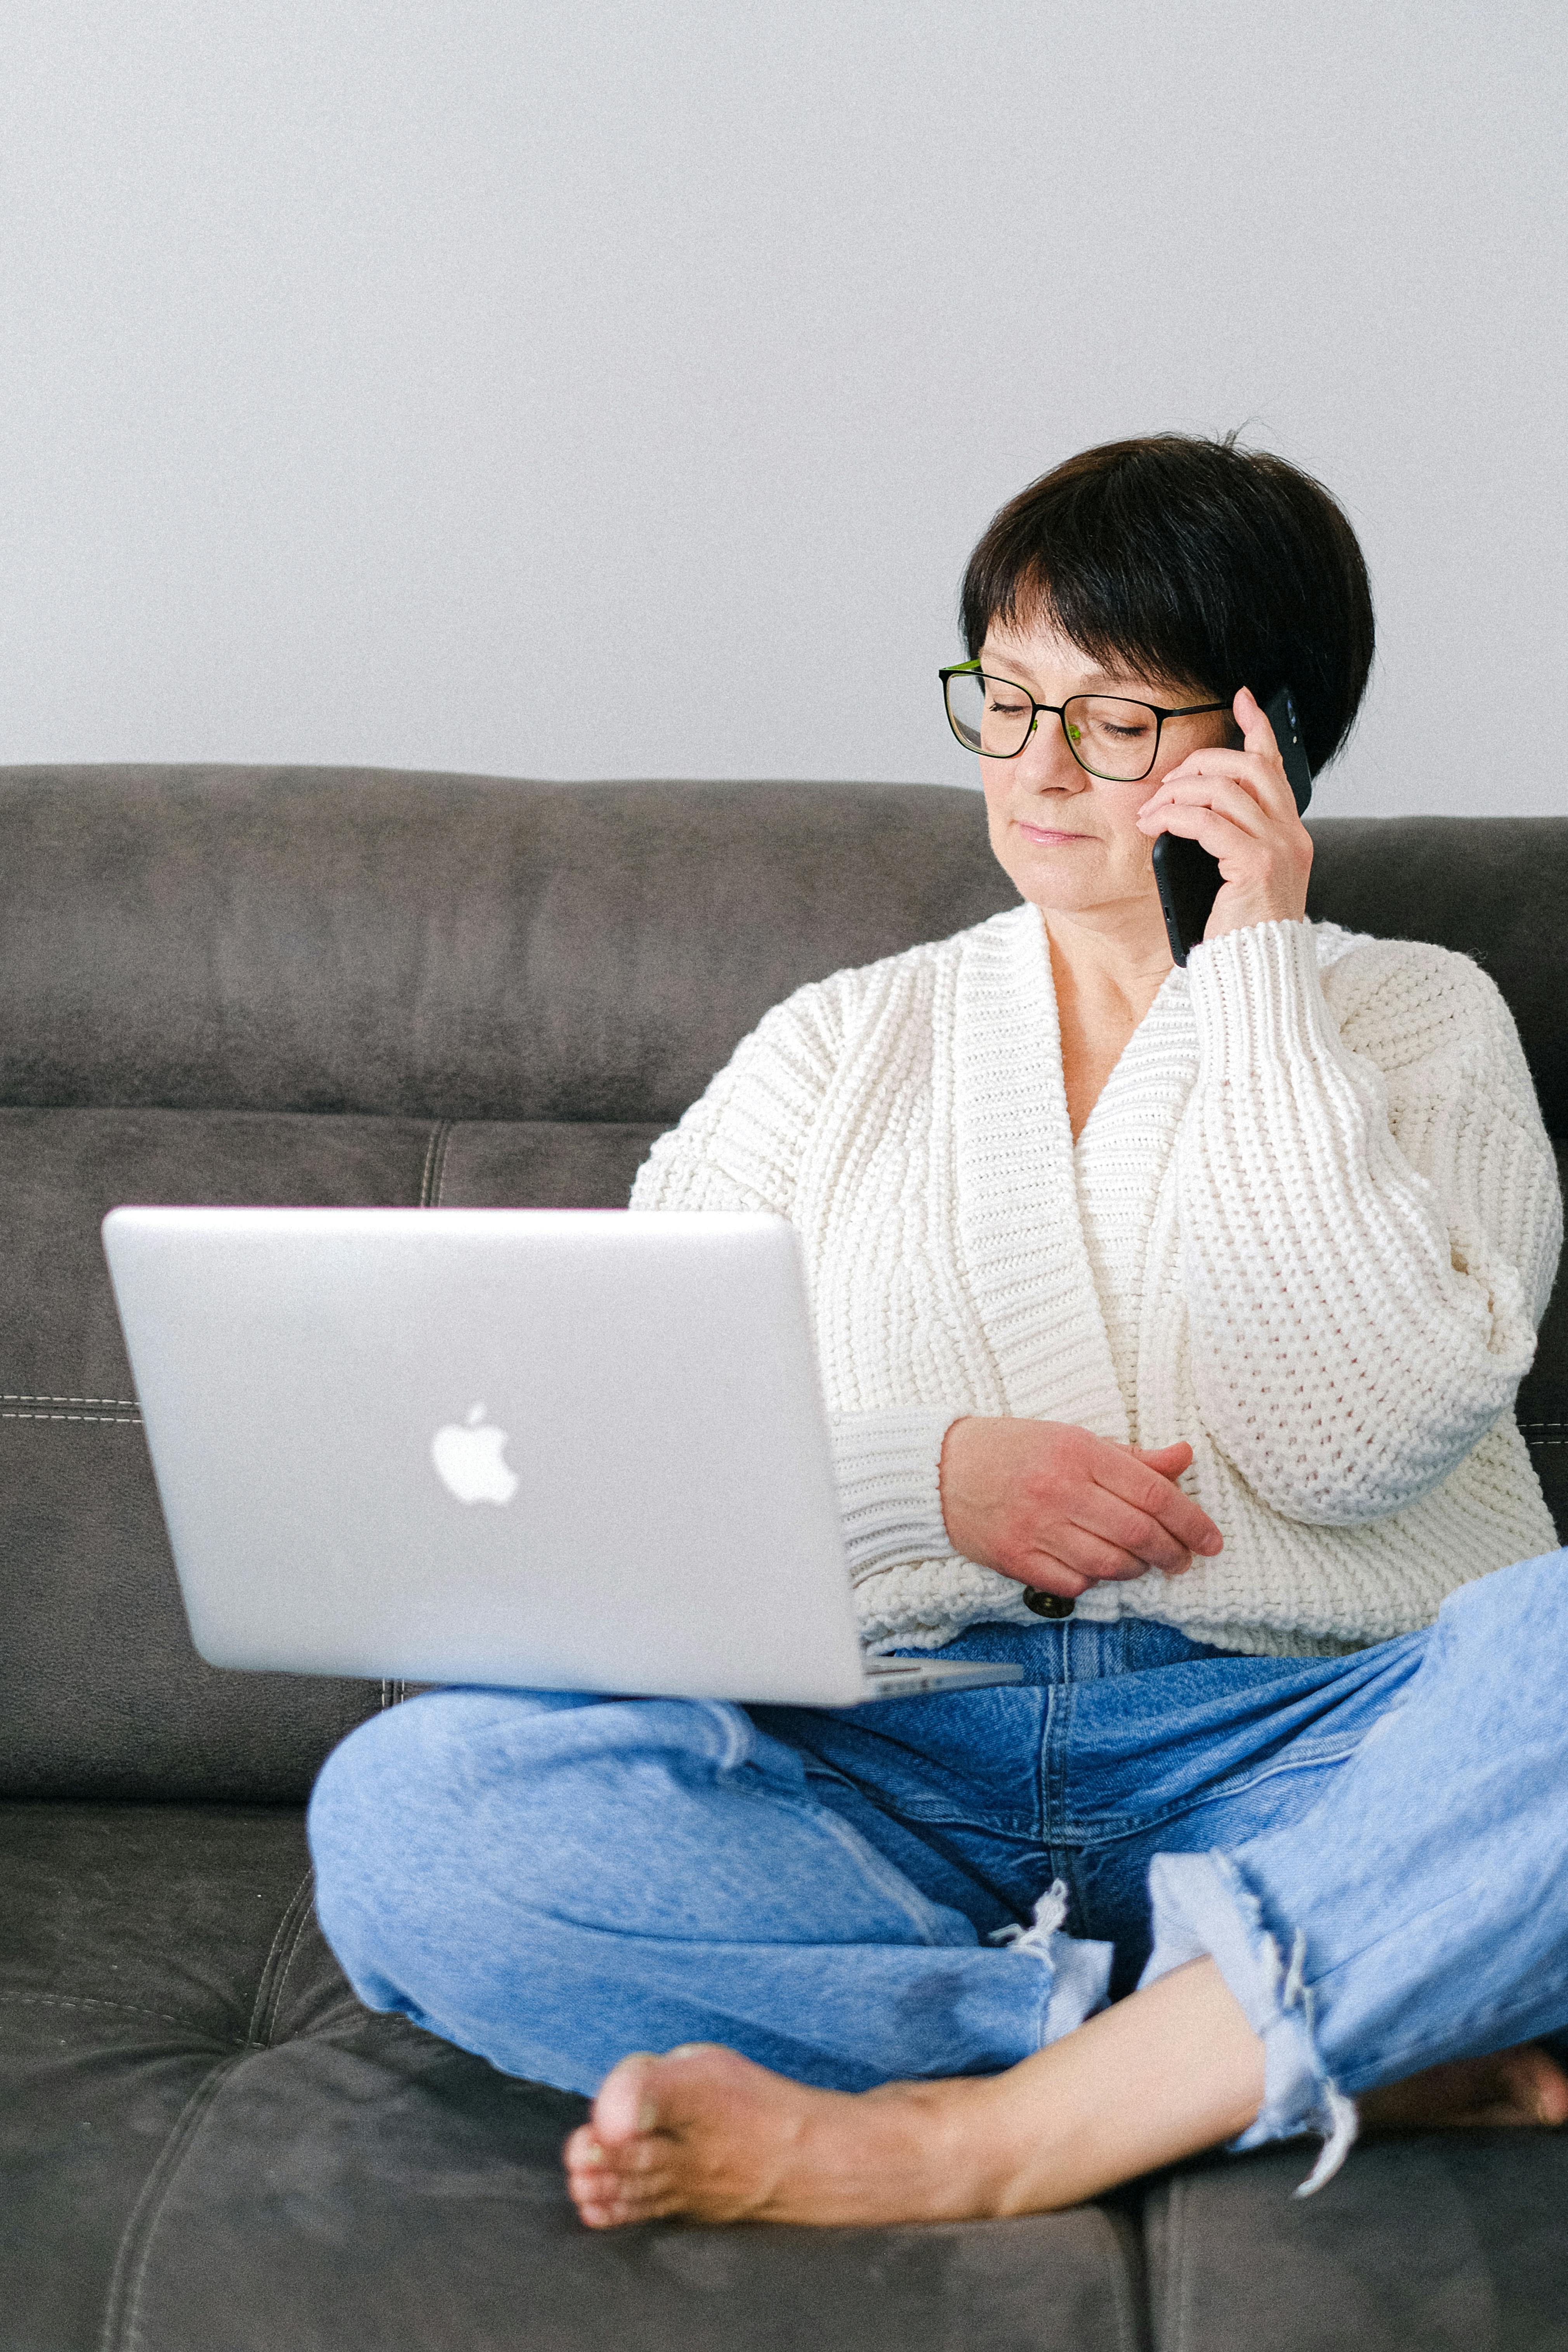 An elderly woman sitting comfortably at home with her gadgets | Source: Pexels